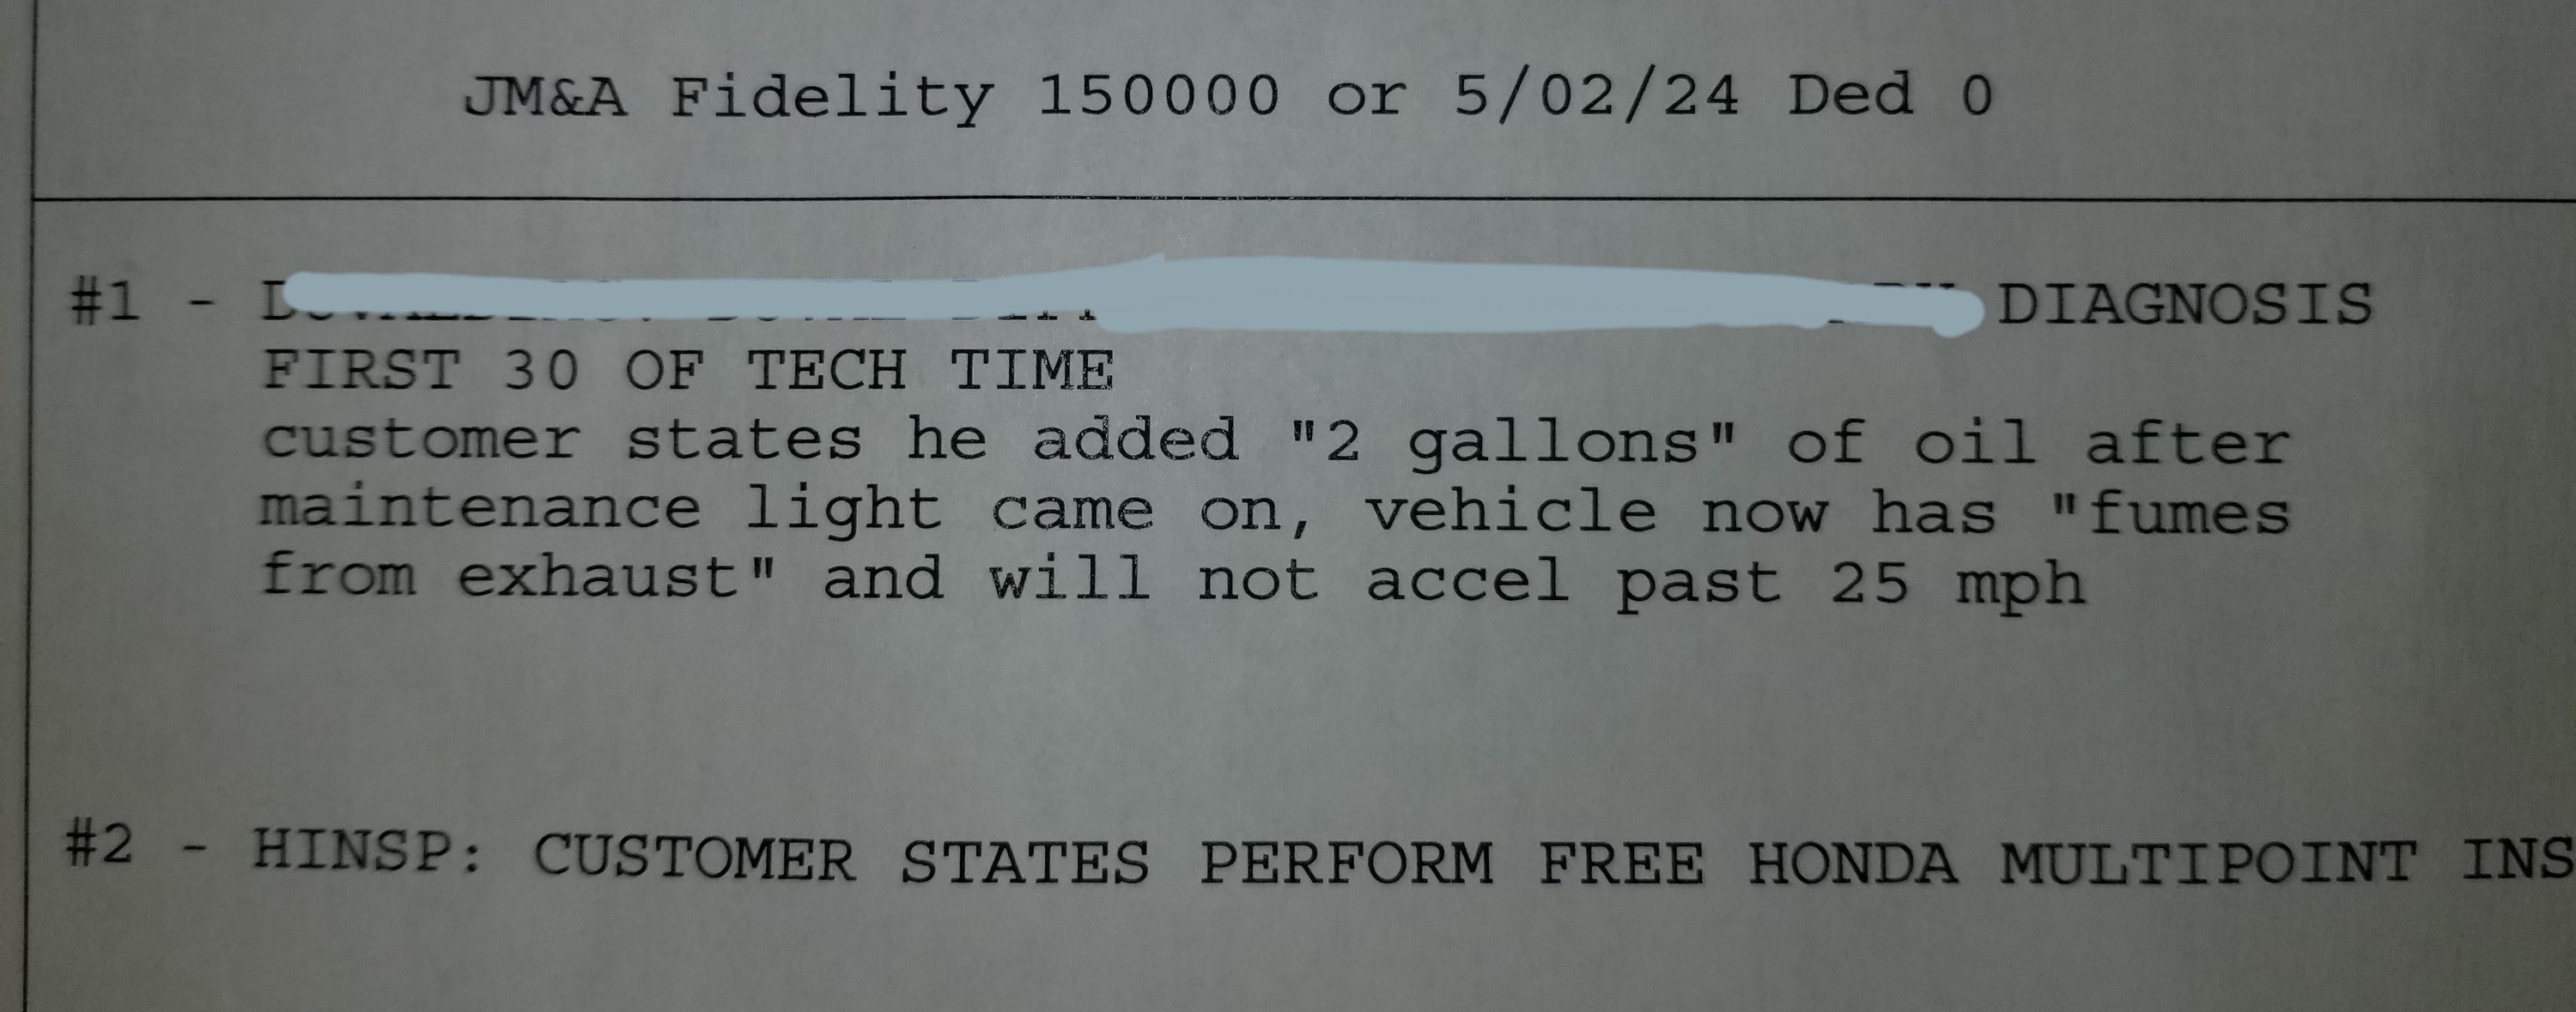 A mechanic&#x27;s diagnosis sheet that says the customer states he added 2 gallons of oil after maintenance light came on